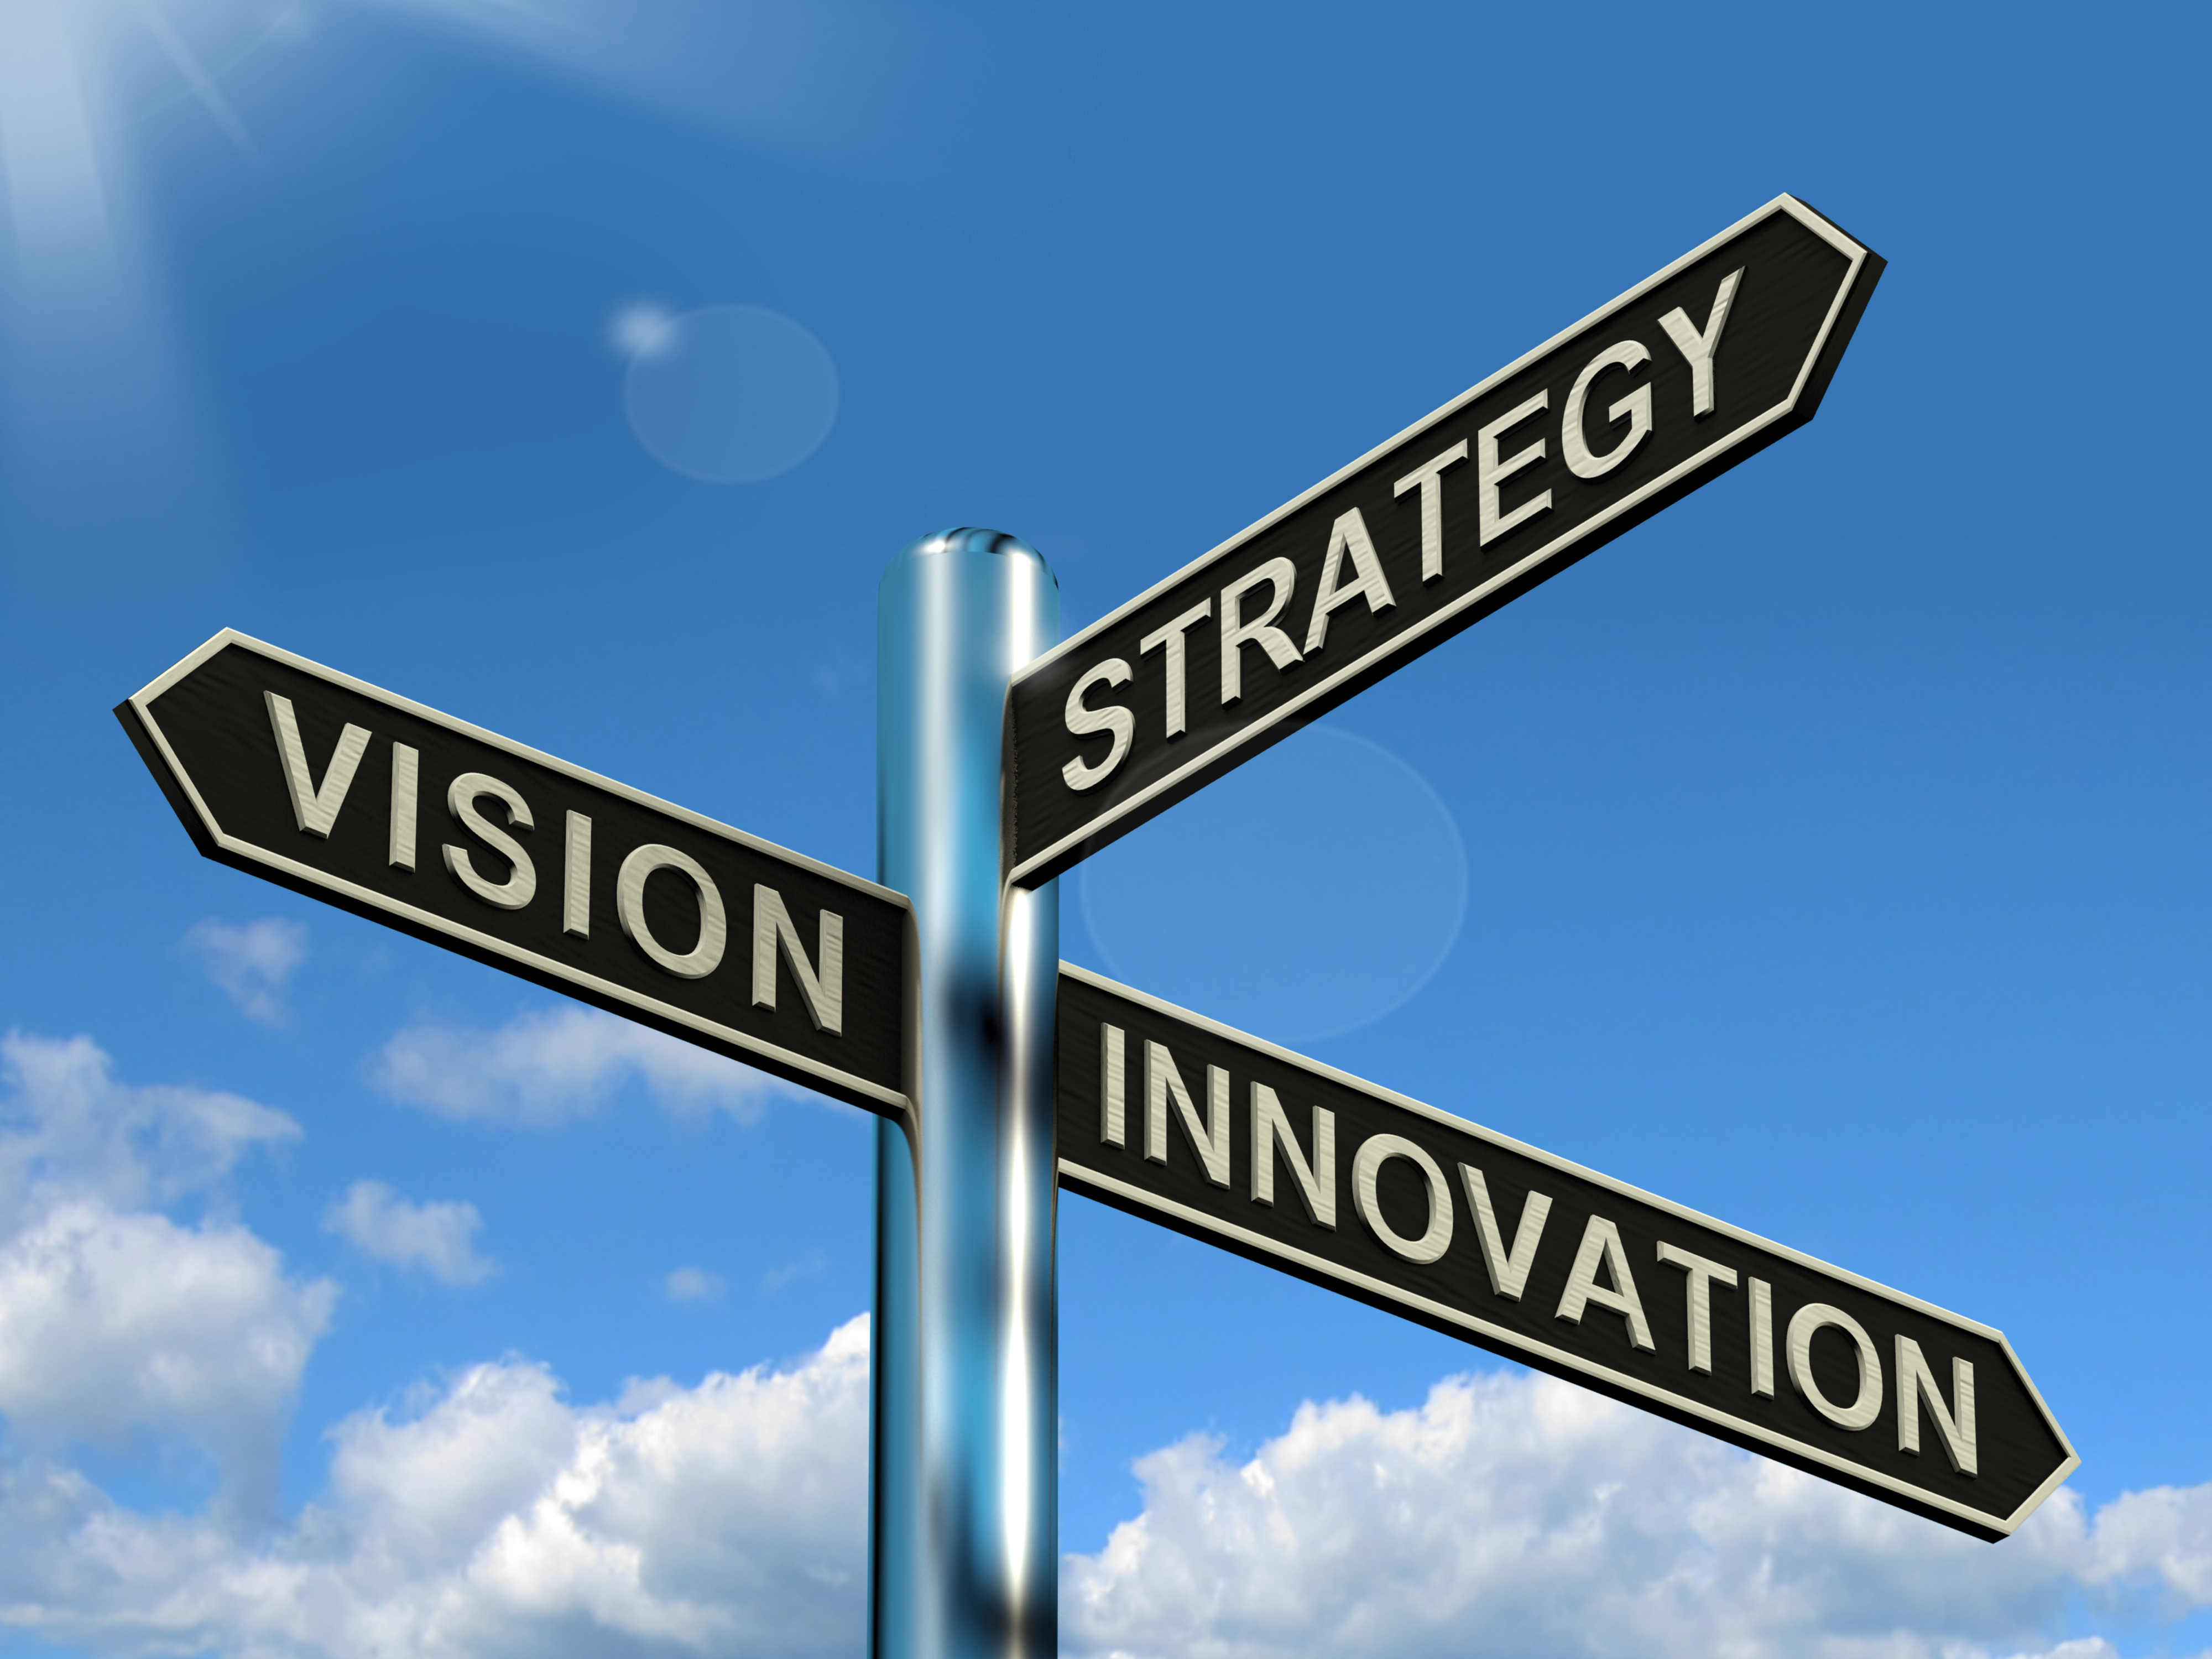 Vision Strategy Innovation Signpost Showing Business Leadership And Ideas